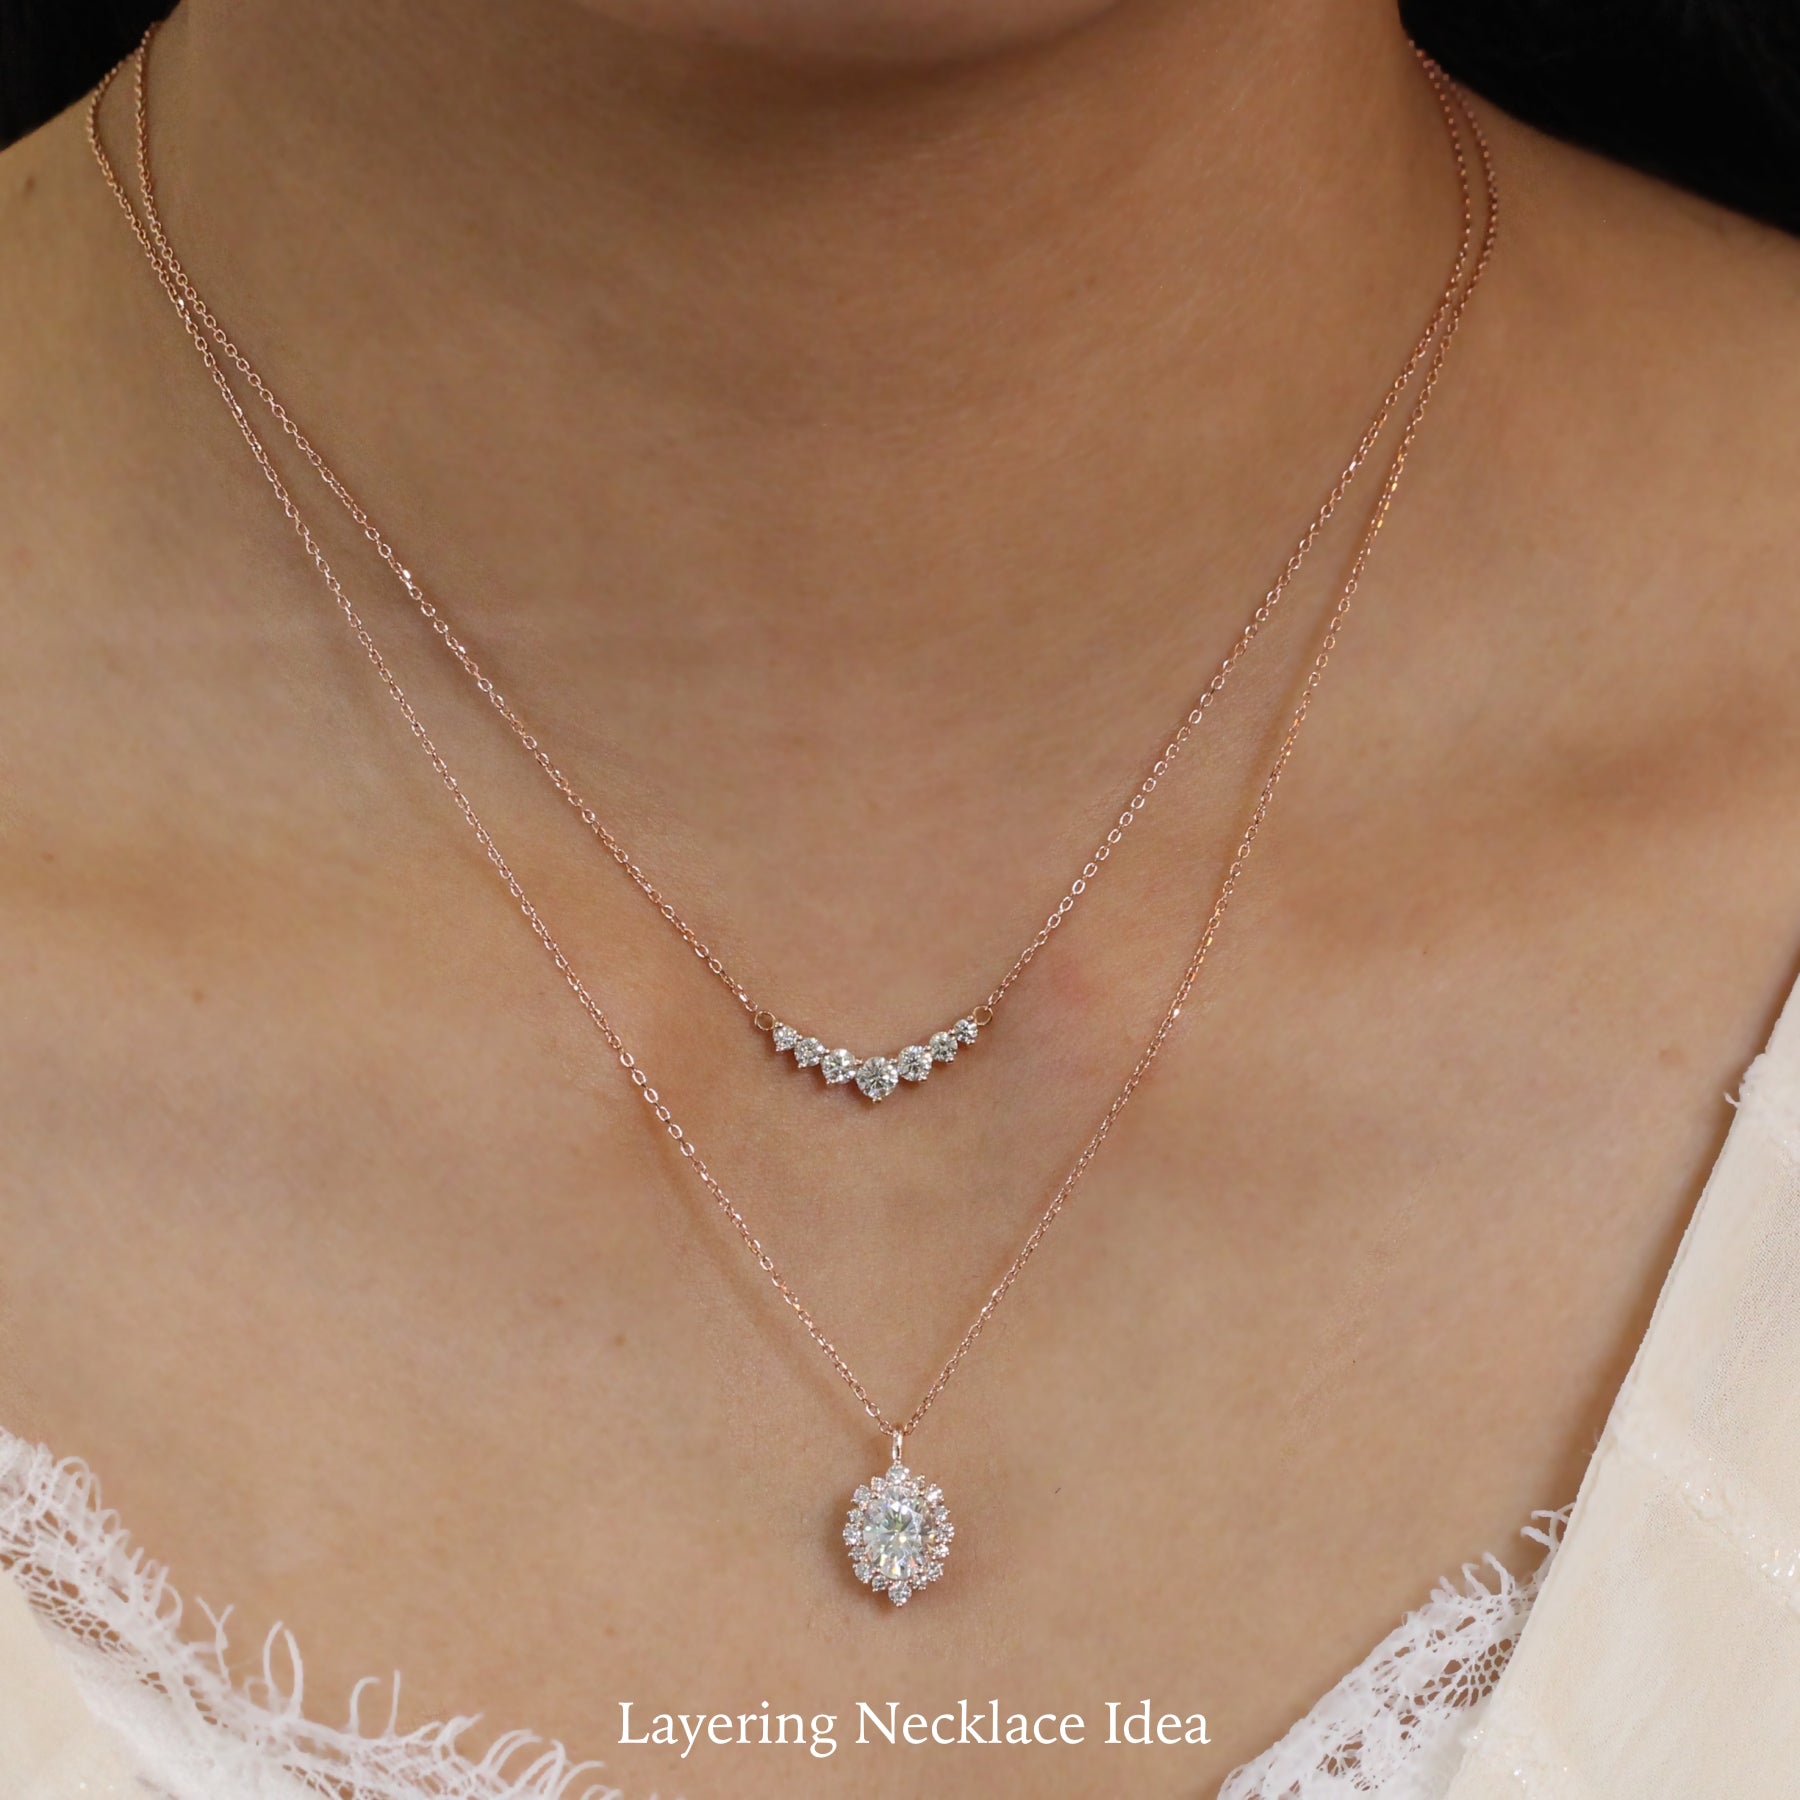 Three necklaces perfectly layered, and a ginormous oval shape